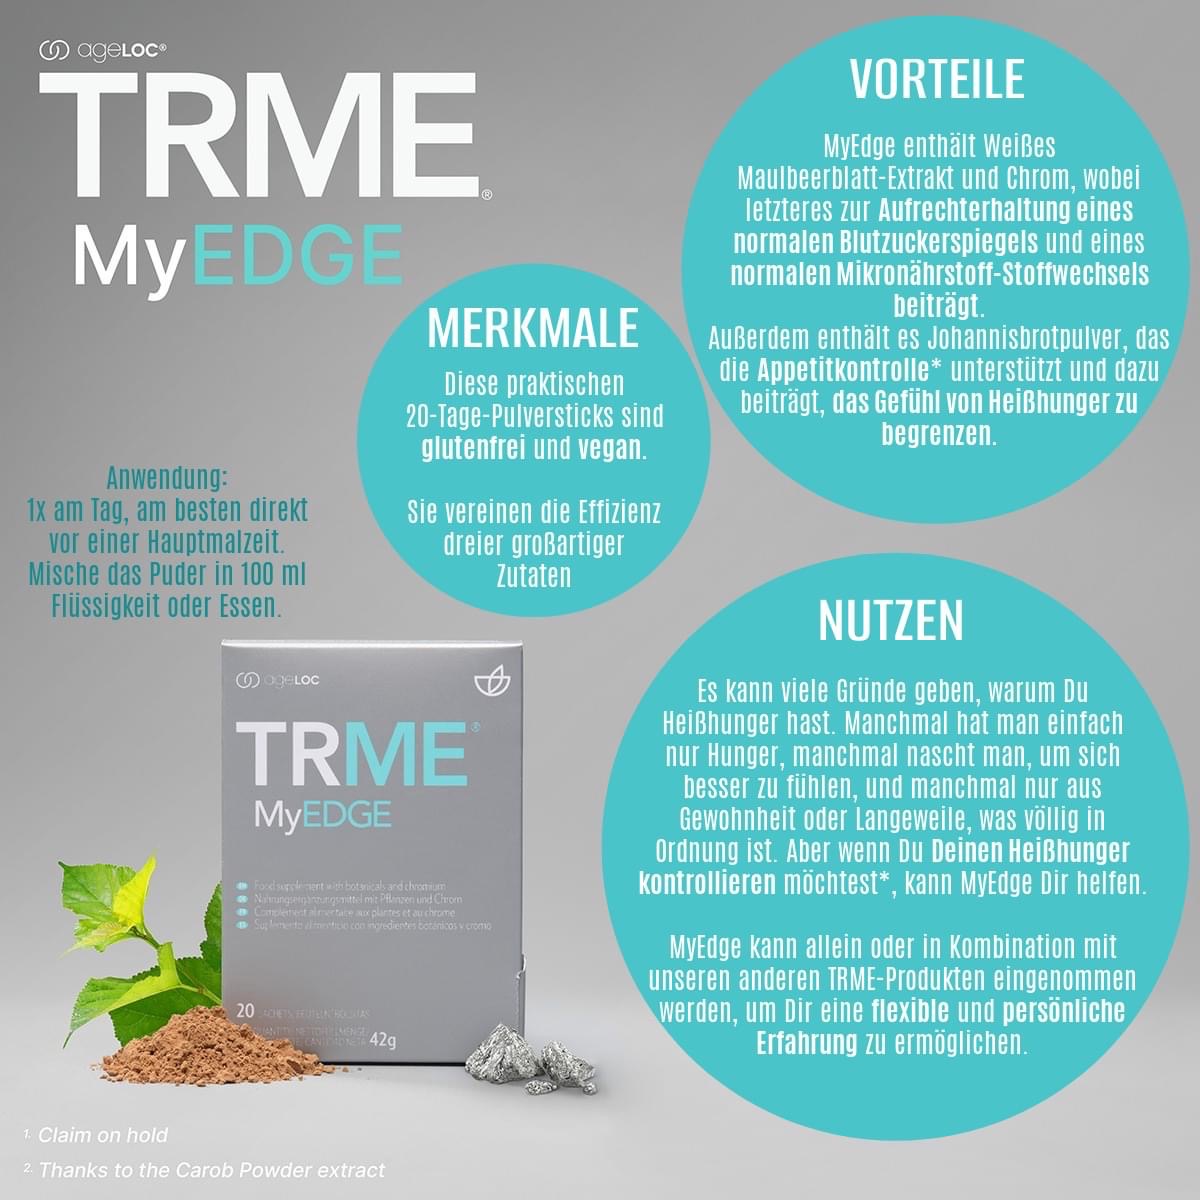 Nu Skin TRME Weight management MyEdge against cravings